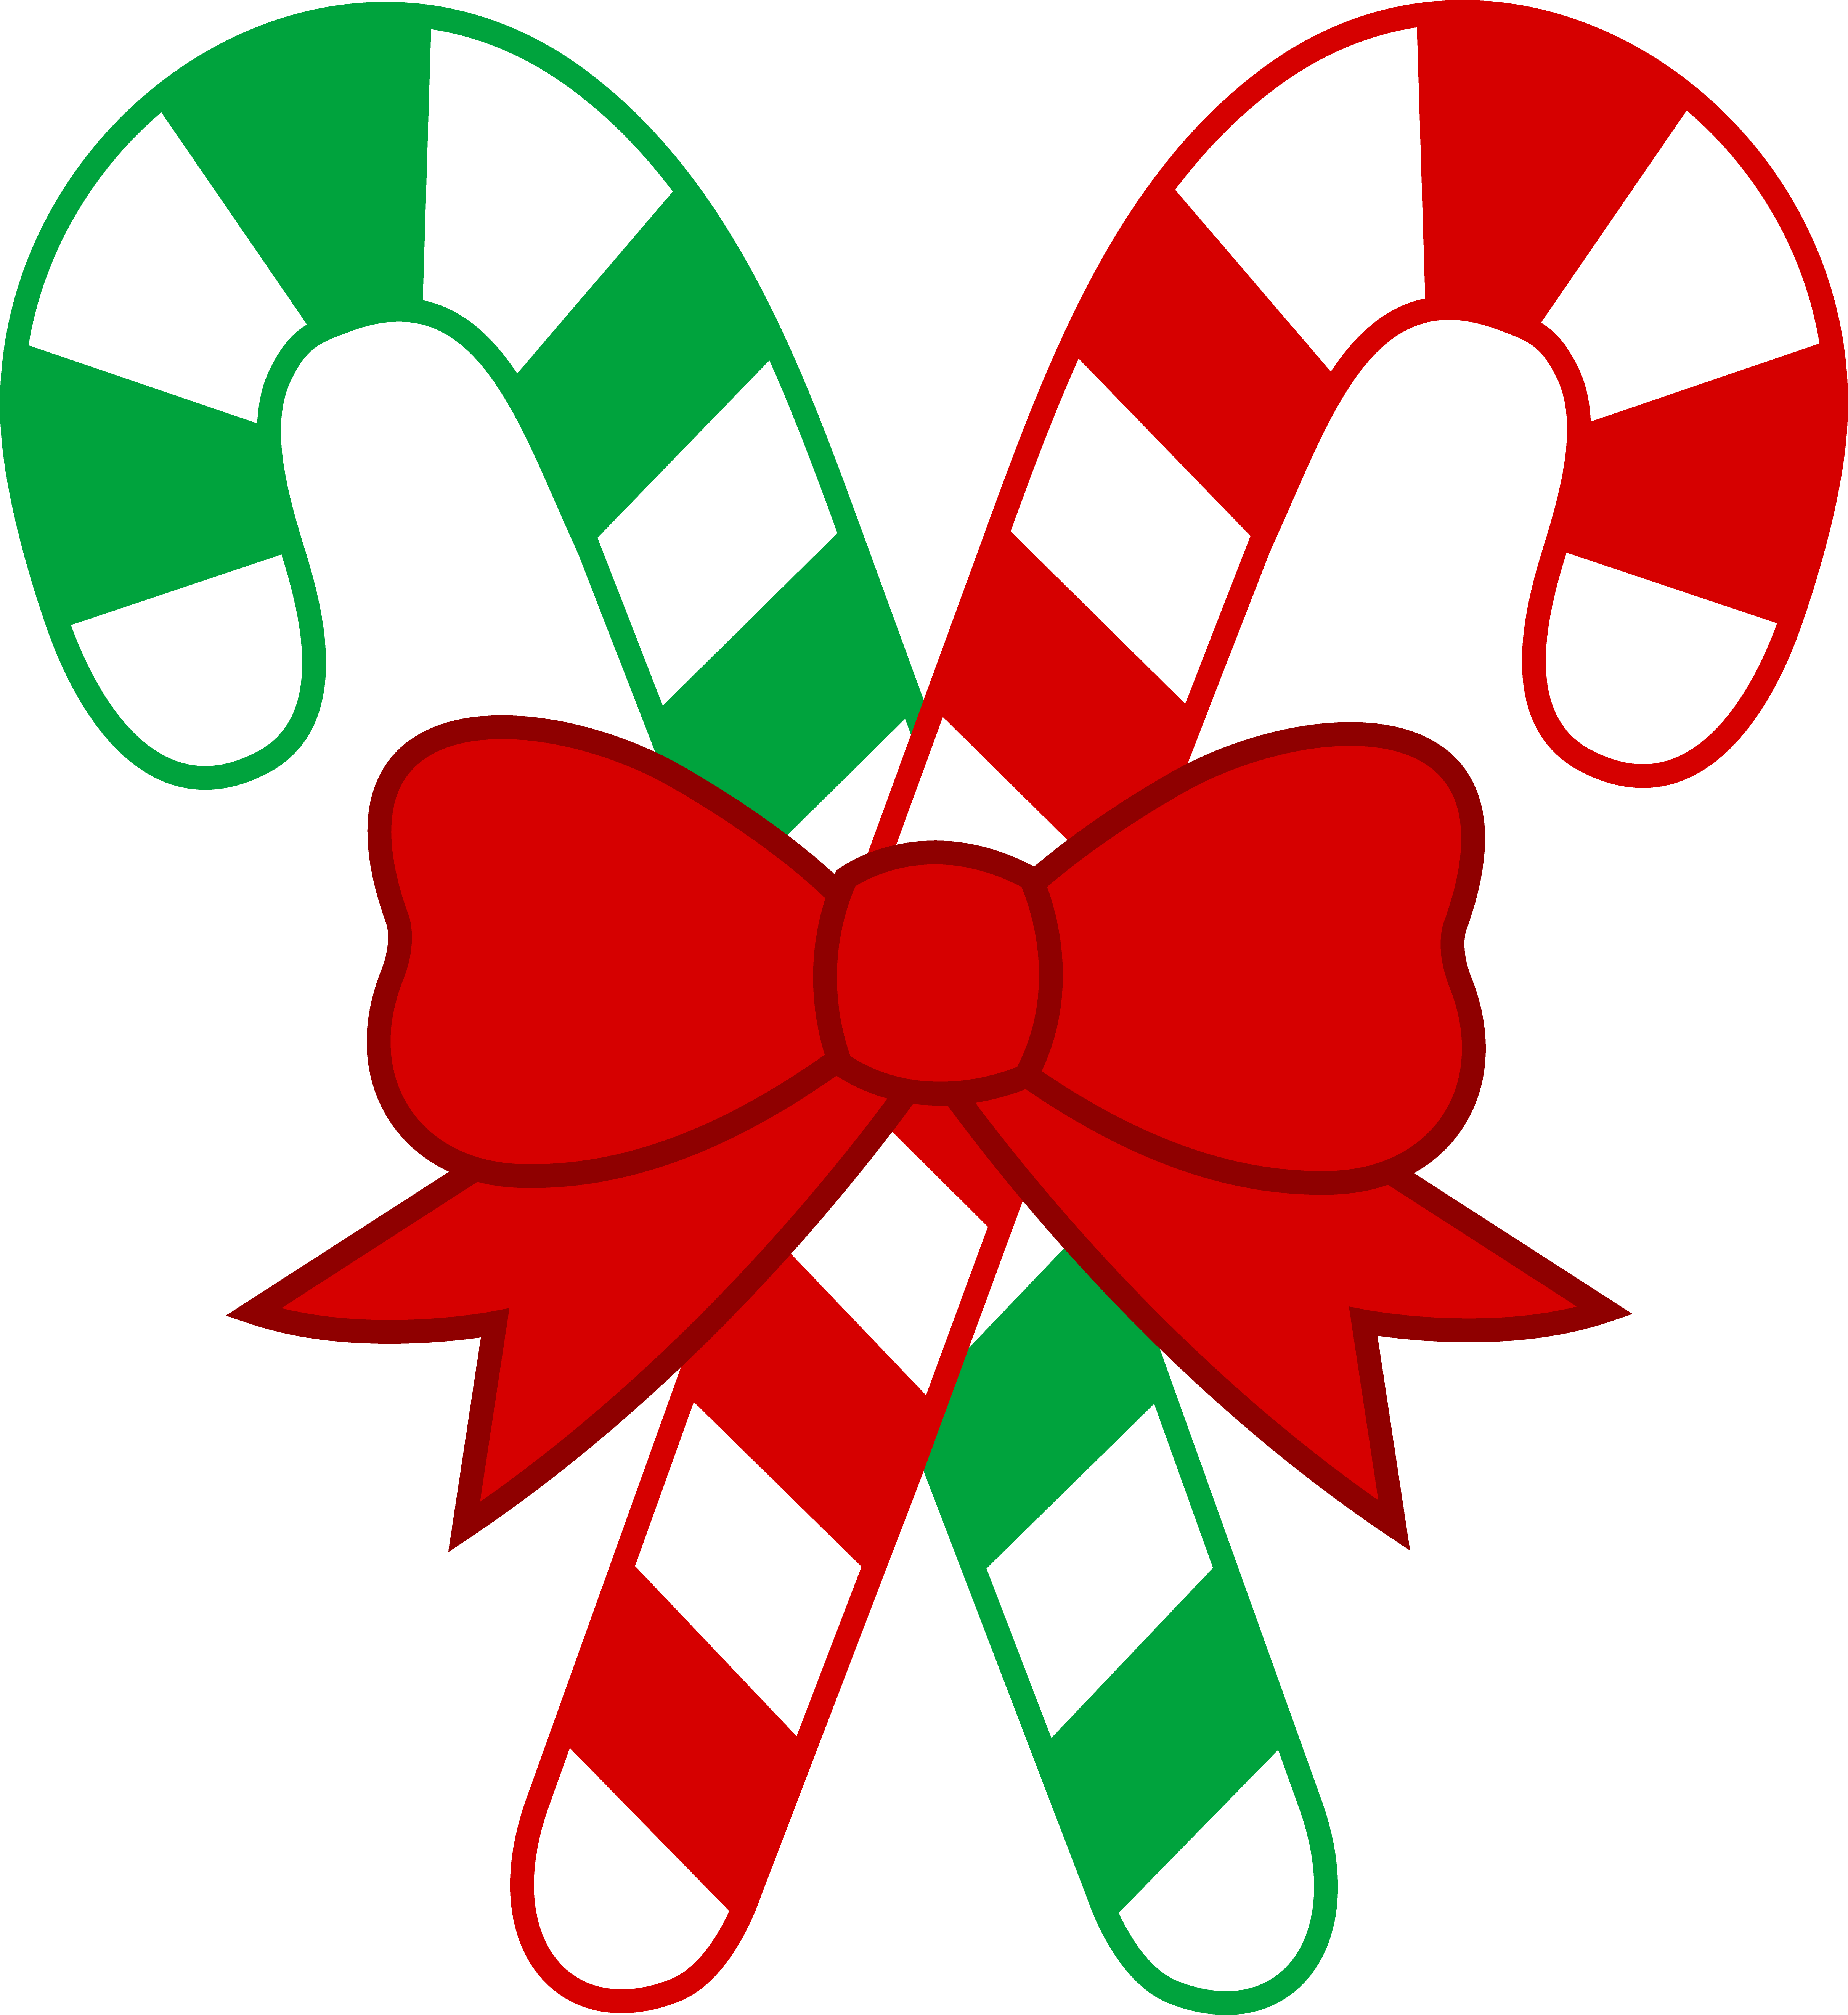 Christmas clipart banners | ClipartMonk - Free Clip Art Images